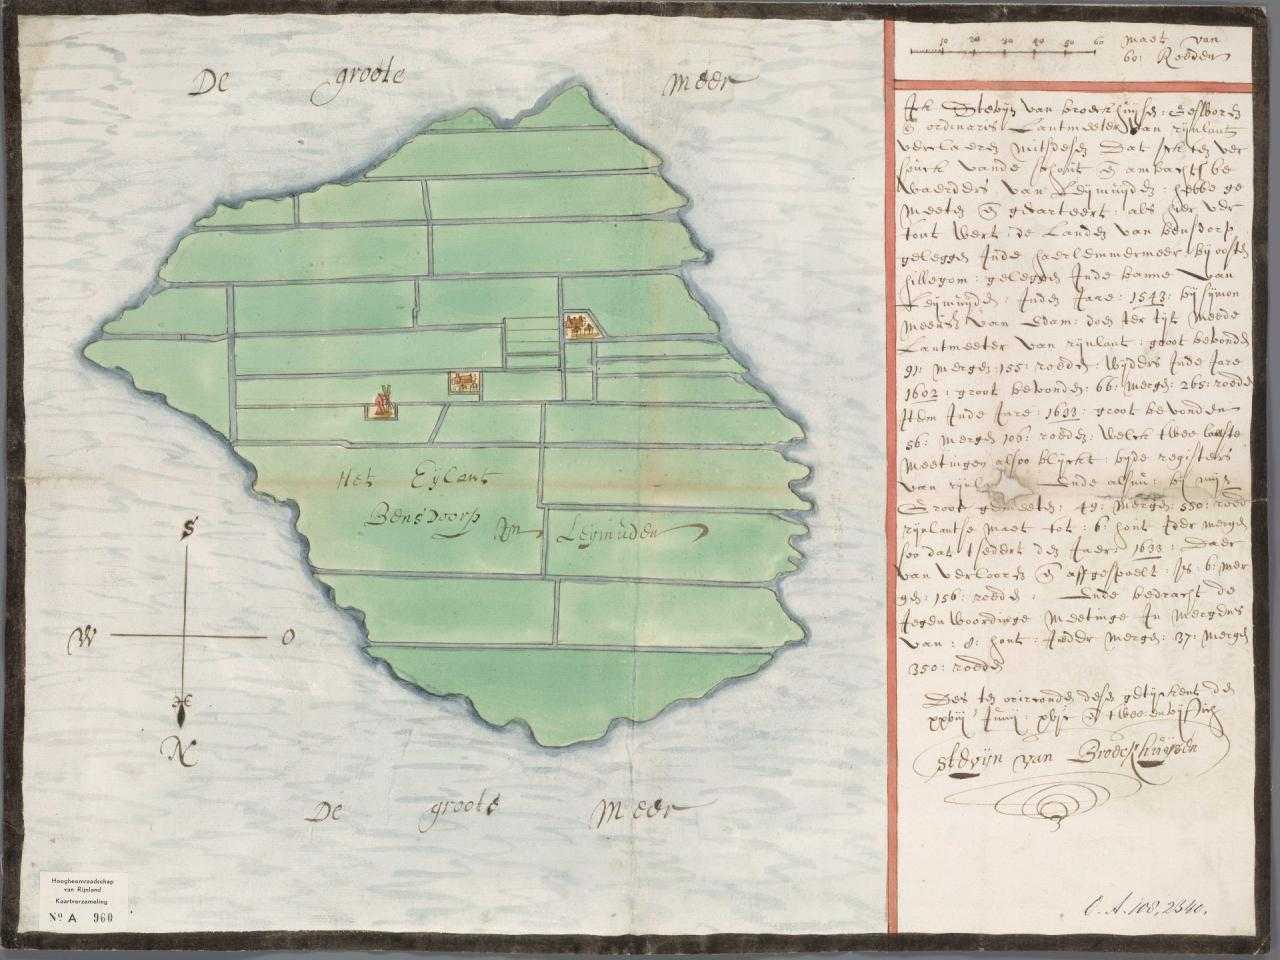 Image of the island of Beinsdorp, map of the Rijnland Water Board from 1625 made by Steven Pieterszoon van Brouckhuijzen